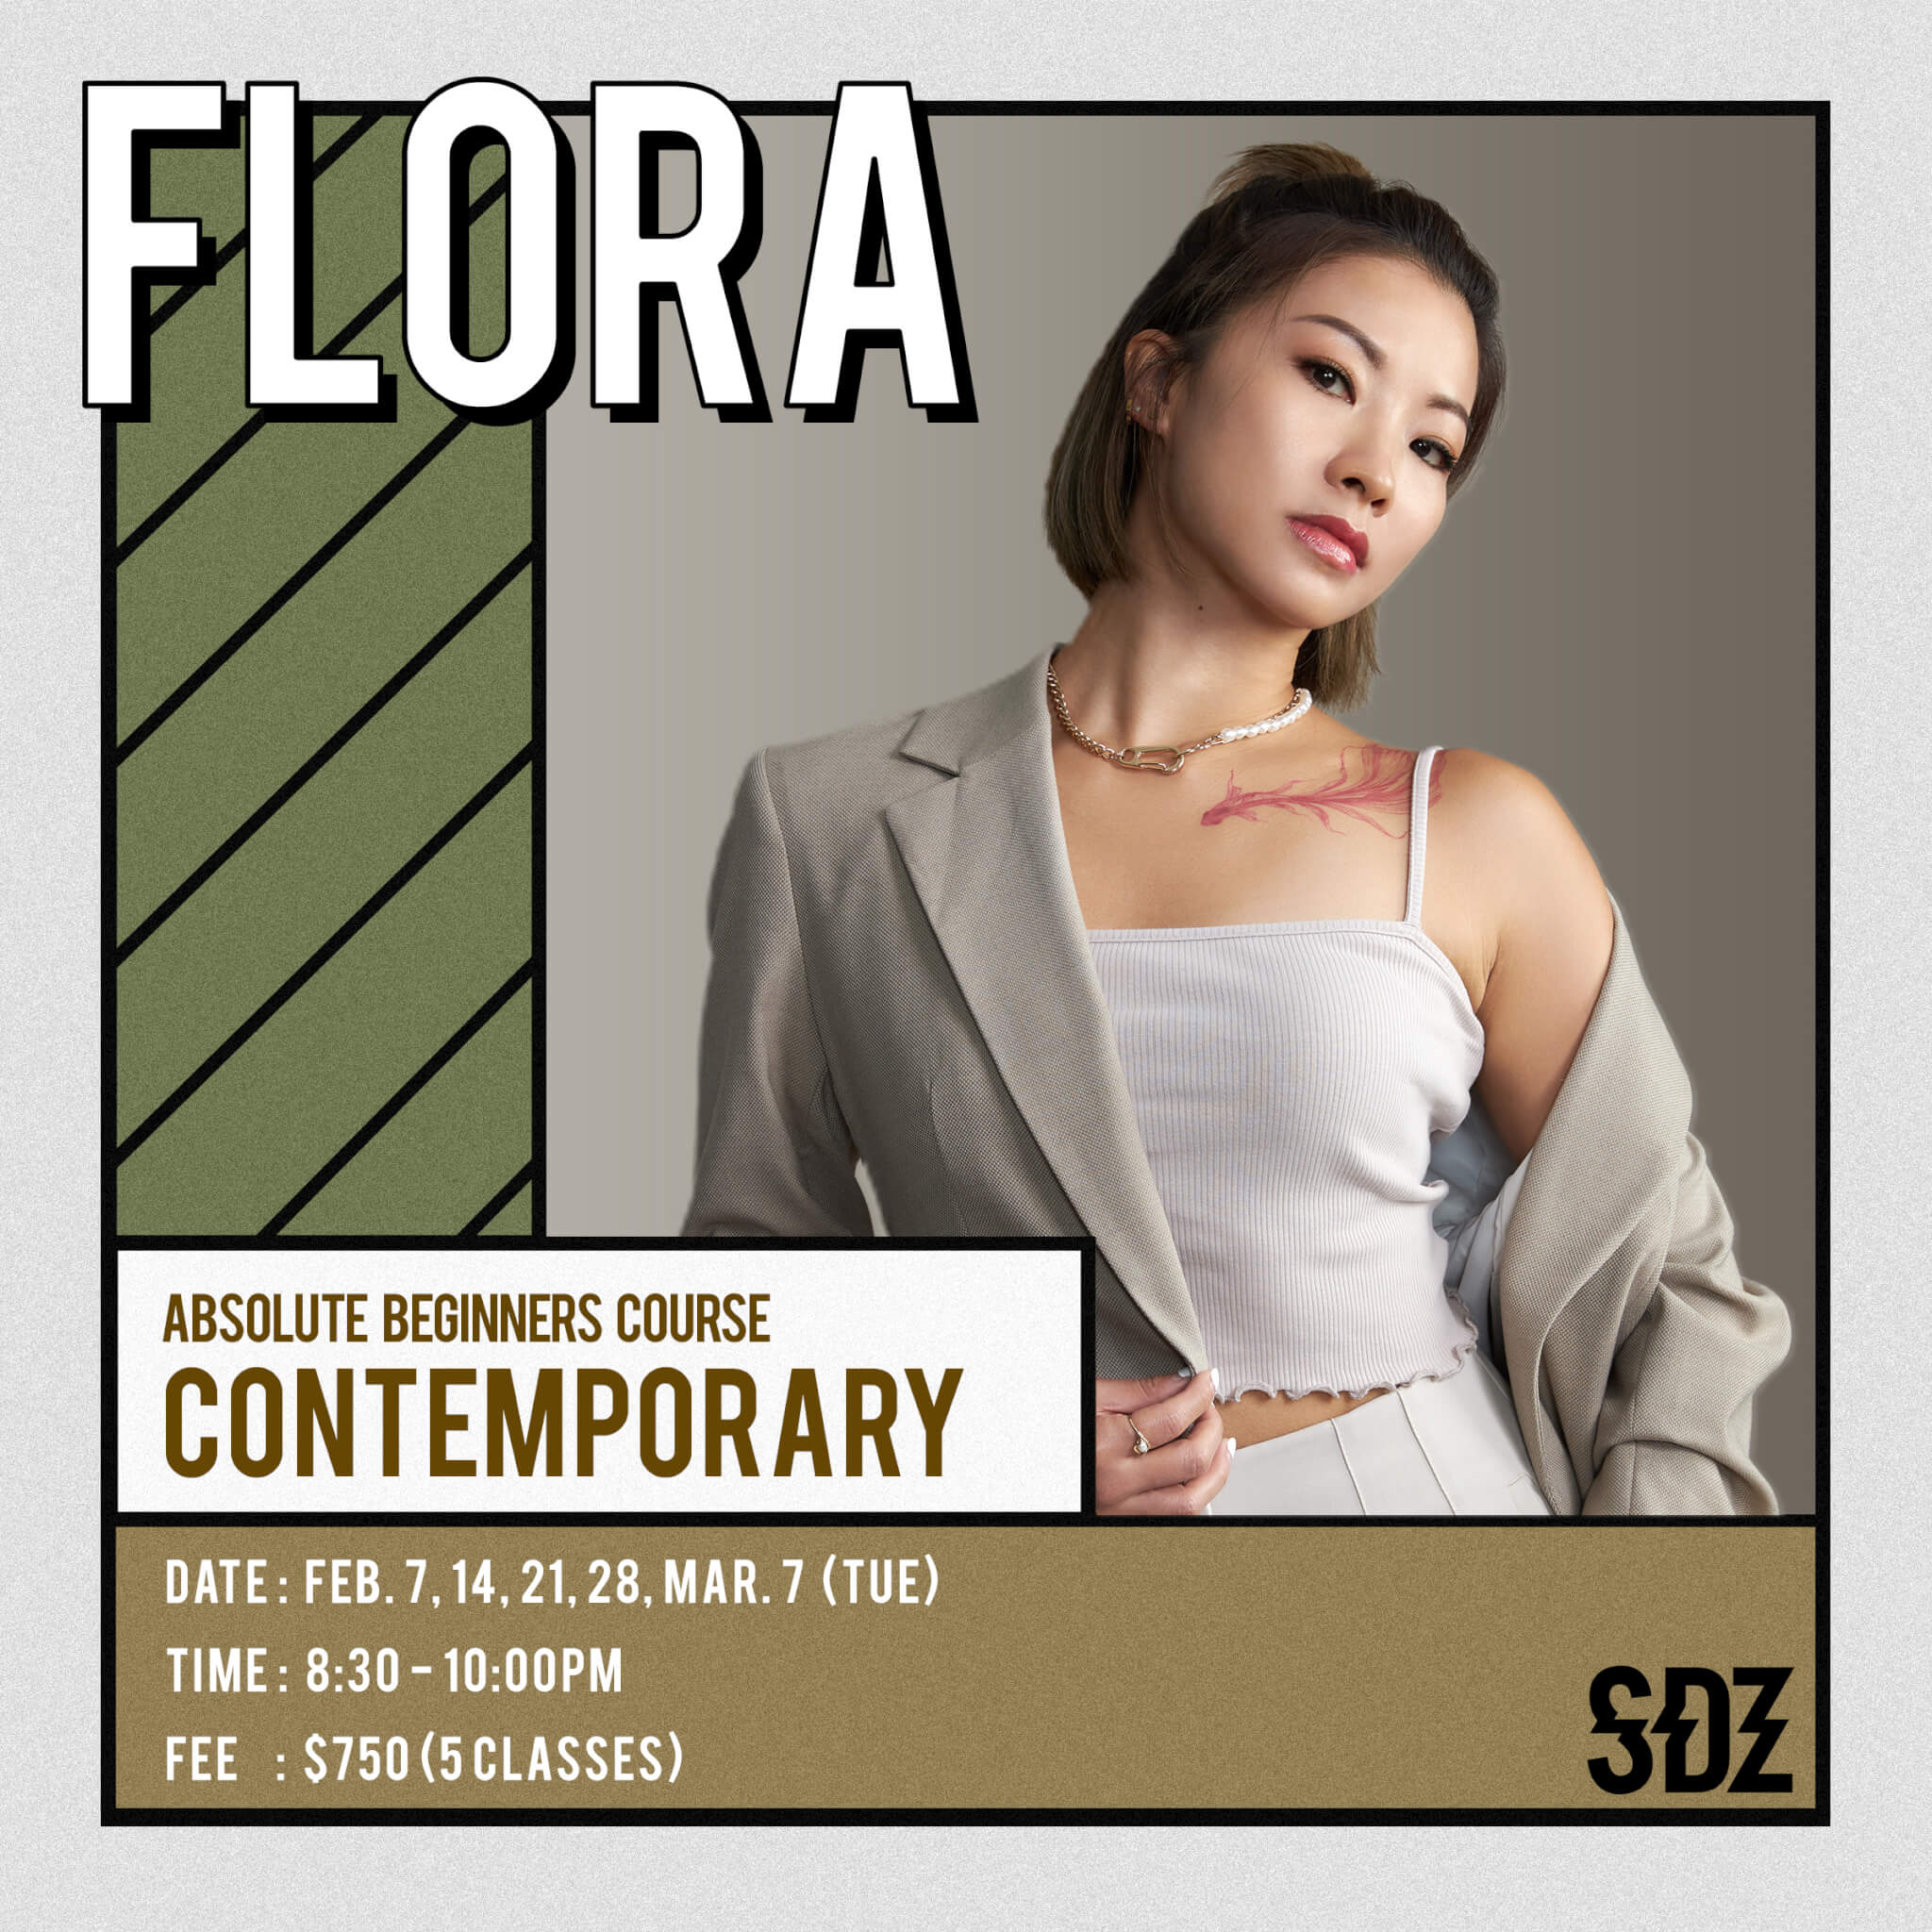 Absolute Beginners Course - Contemporary - Flora (5 Classes)